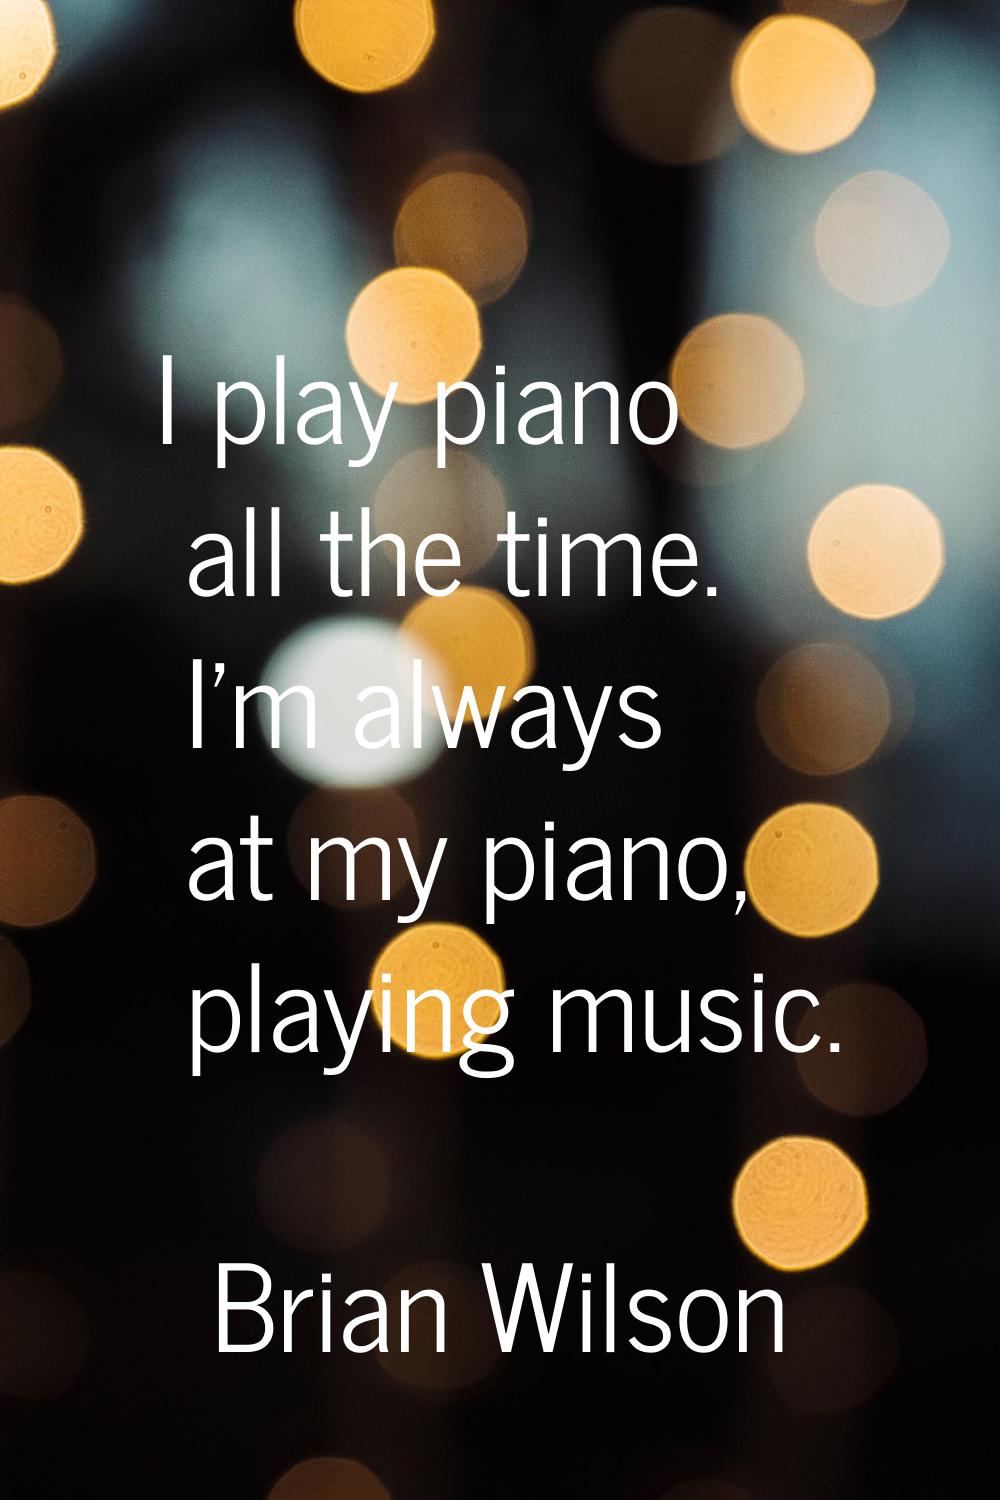 I play piano all the time. I'm always at my piano, playing music.